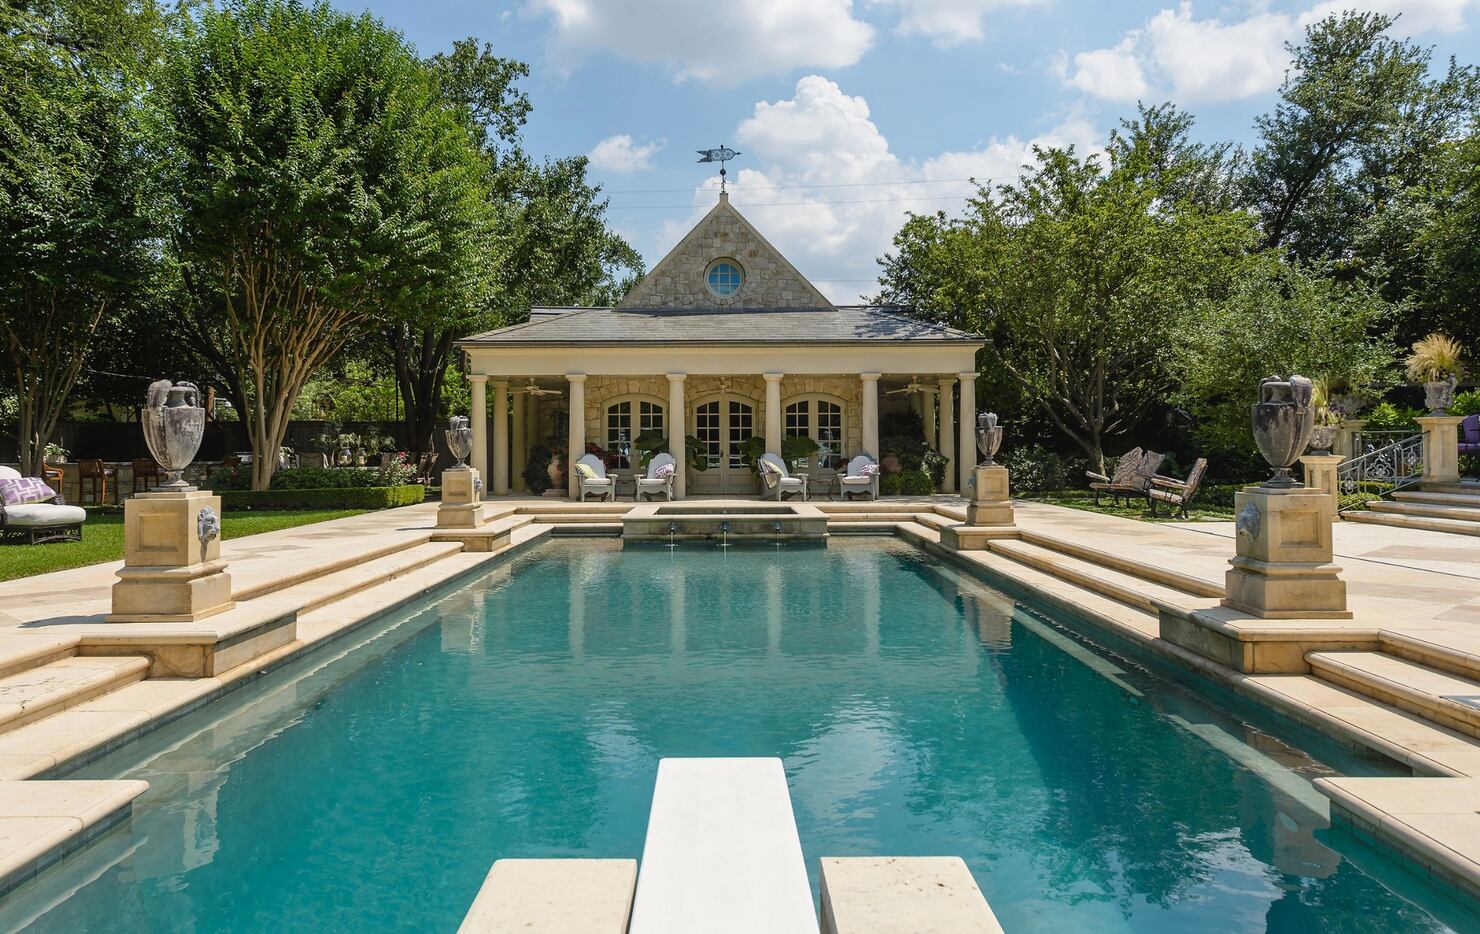 The almost three-acre estate on Hunters Glenn Drive has a pool and cabanas.